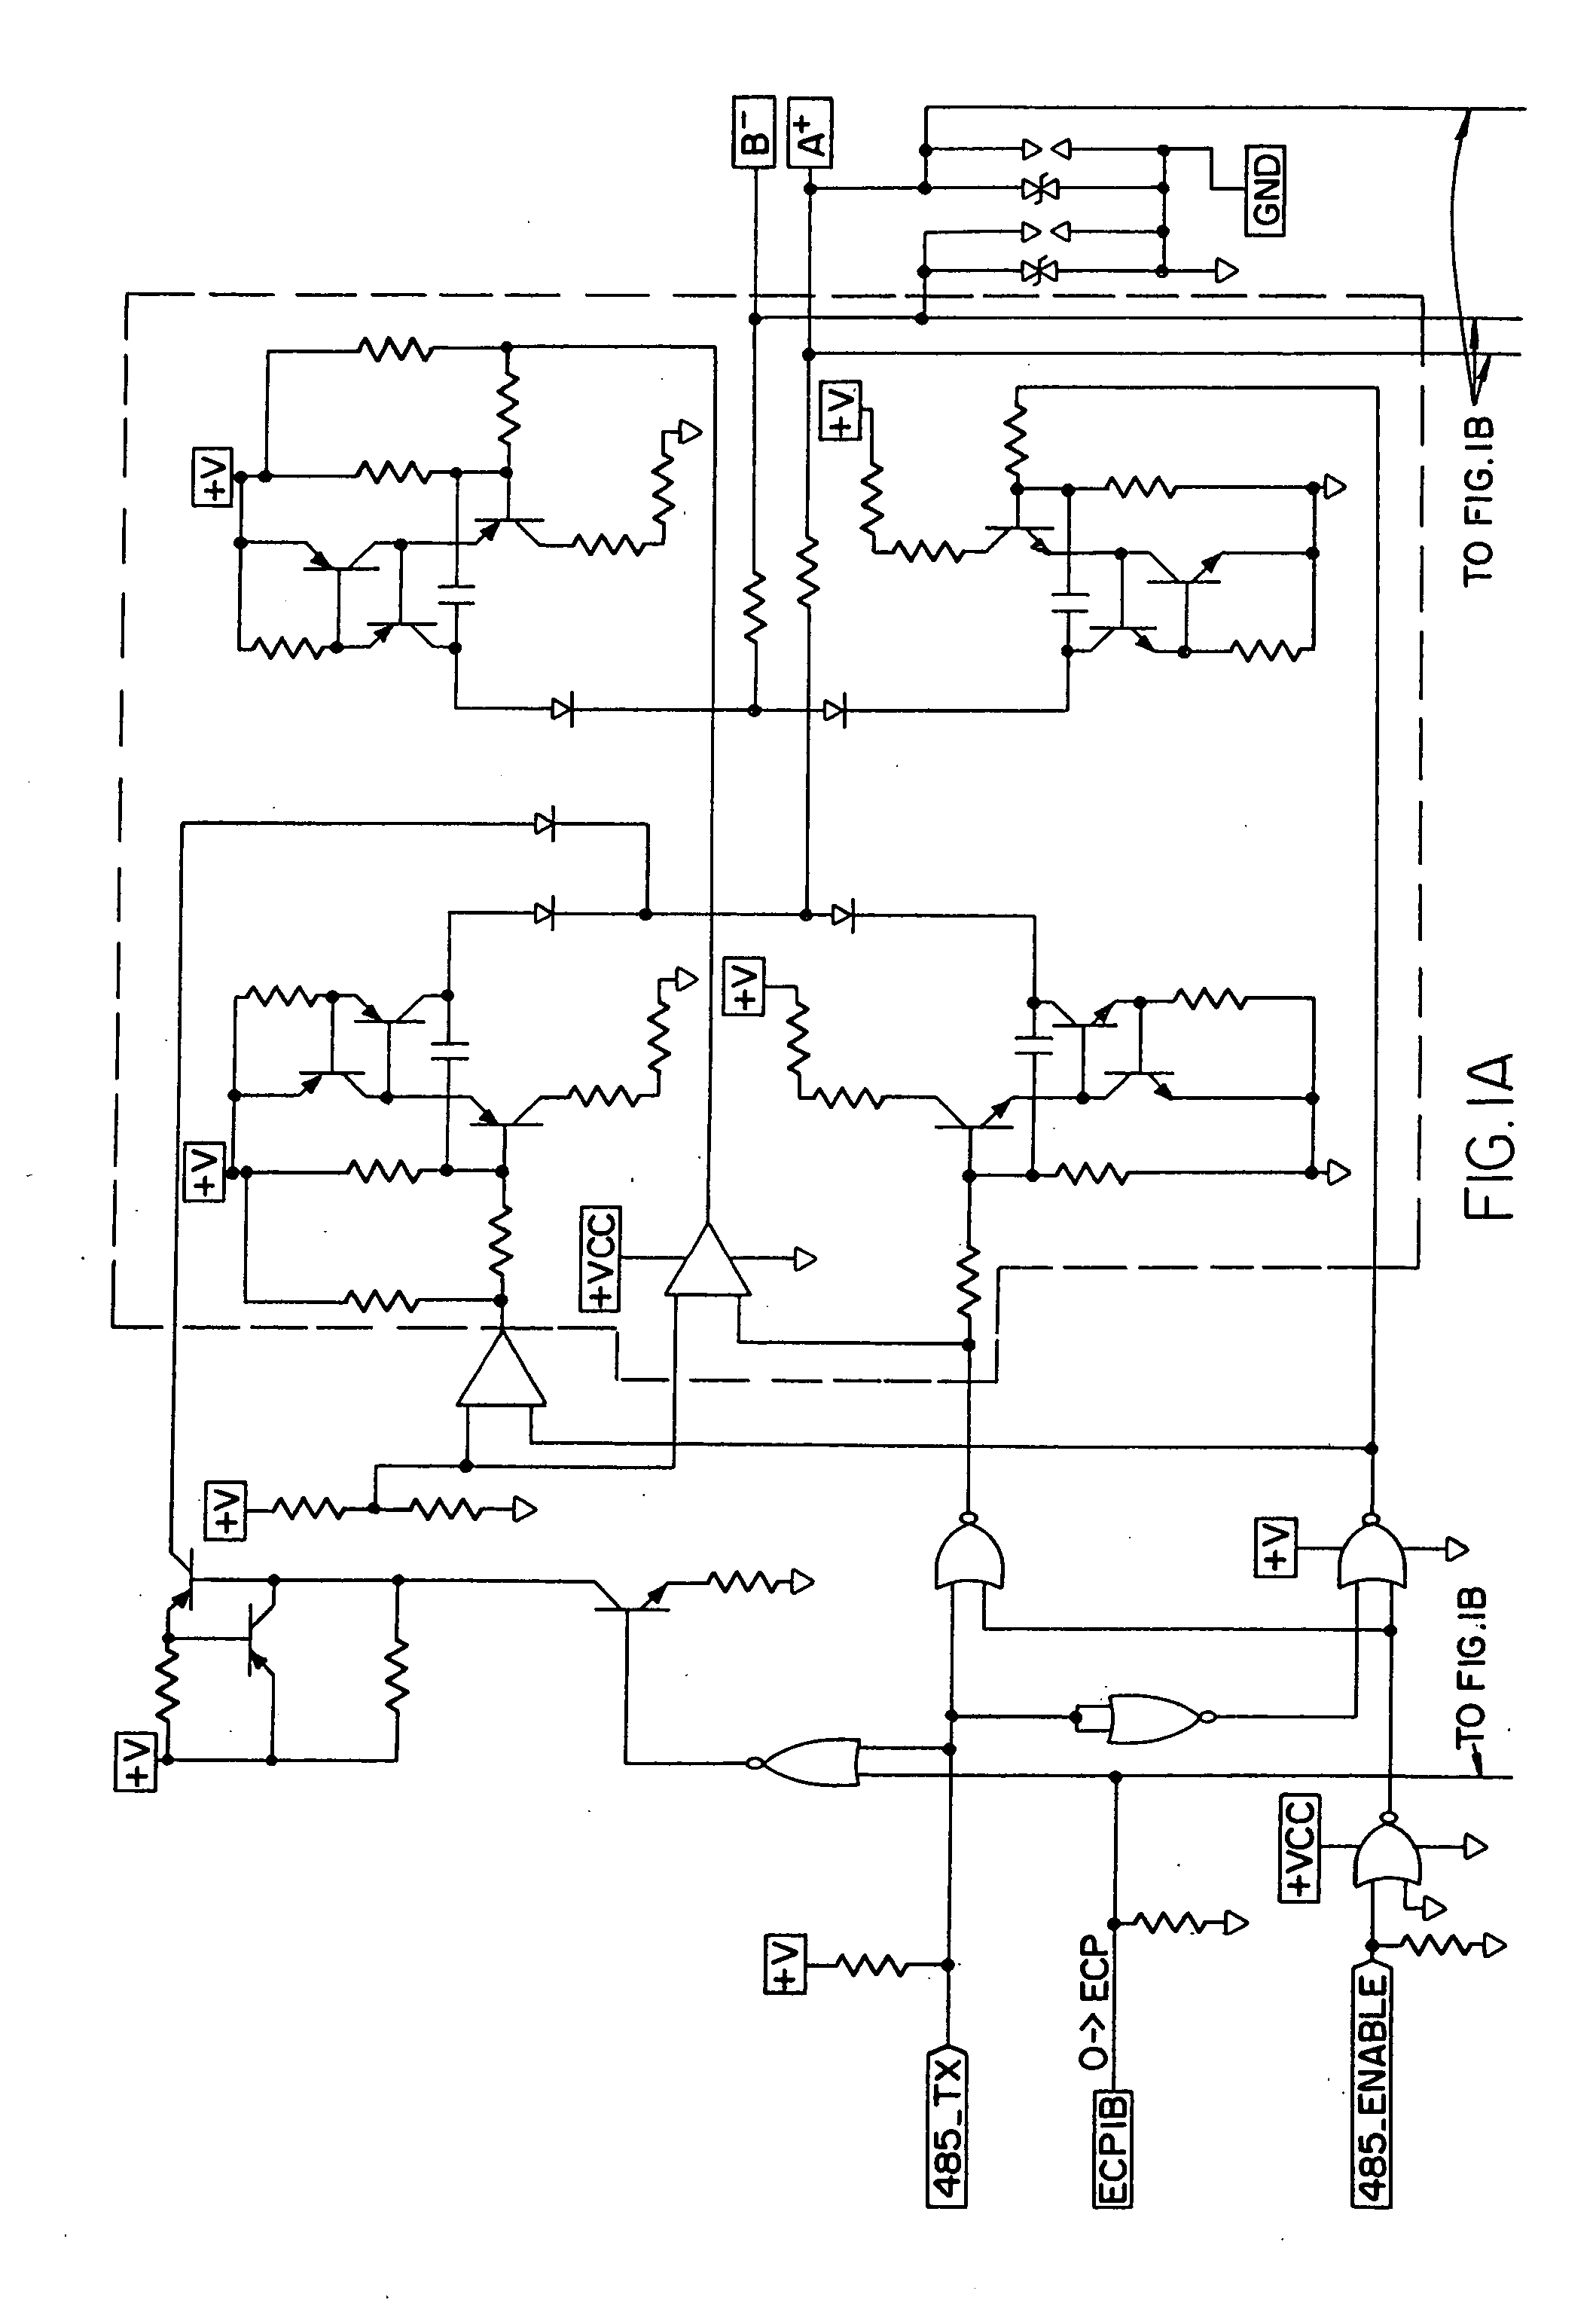 Feedback circuit for line load compensation and reflection reduction